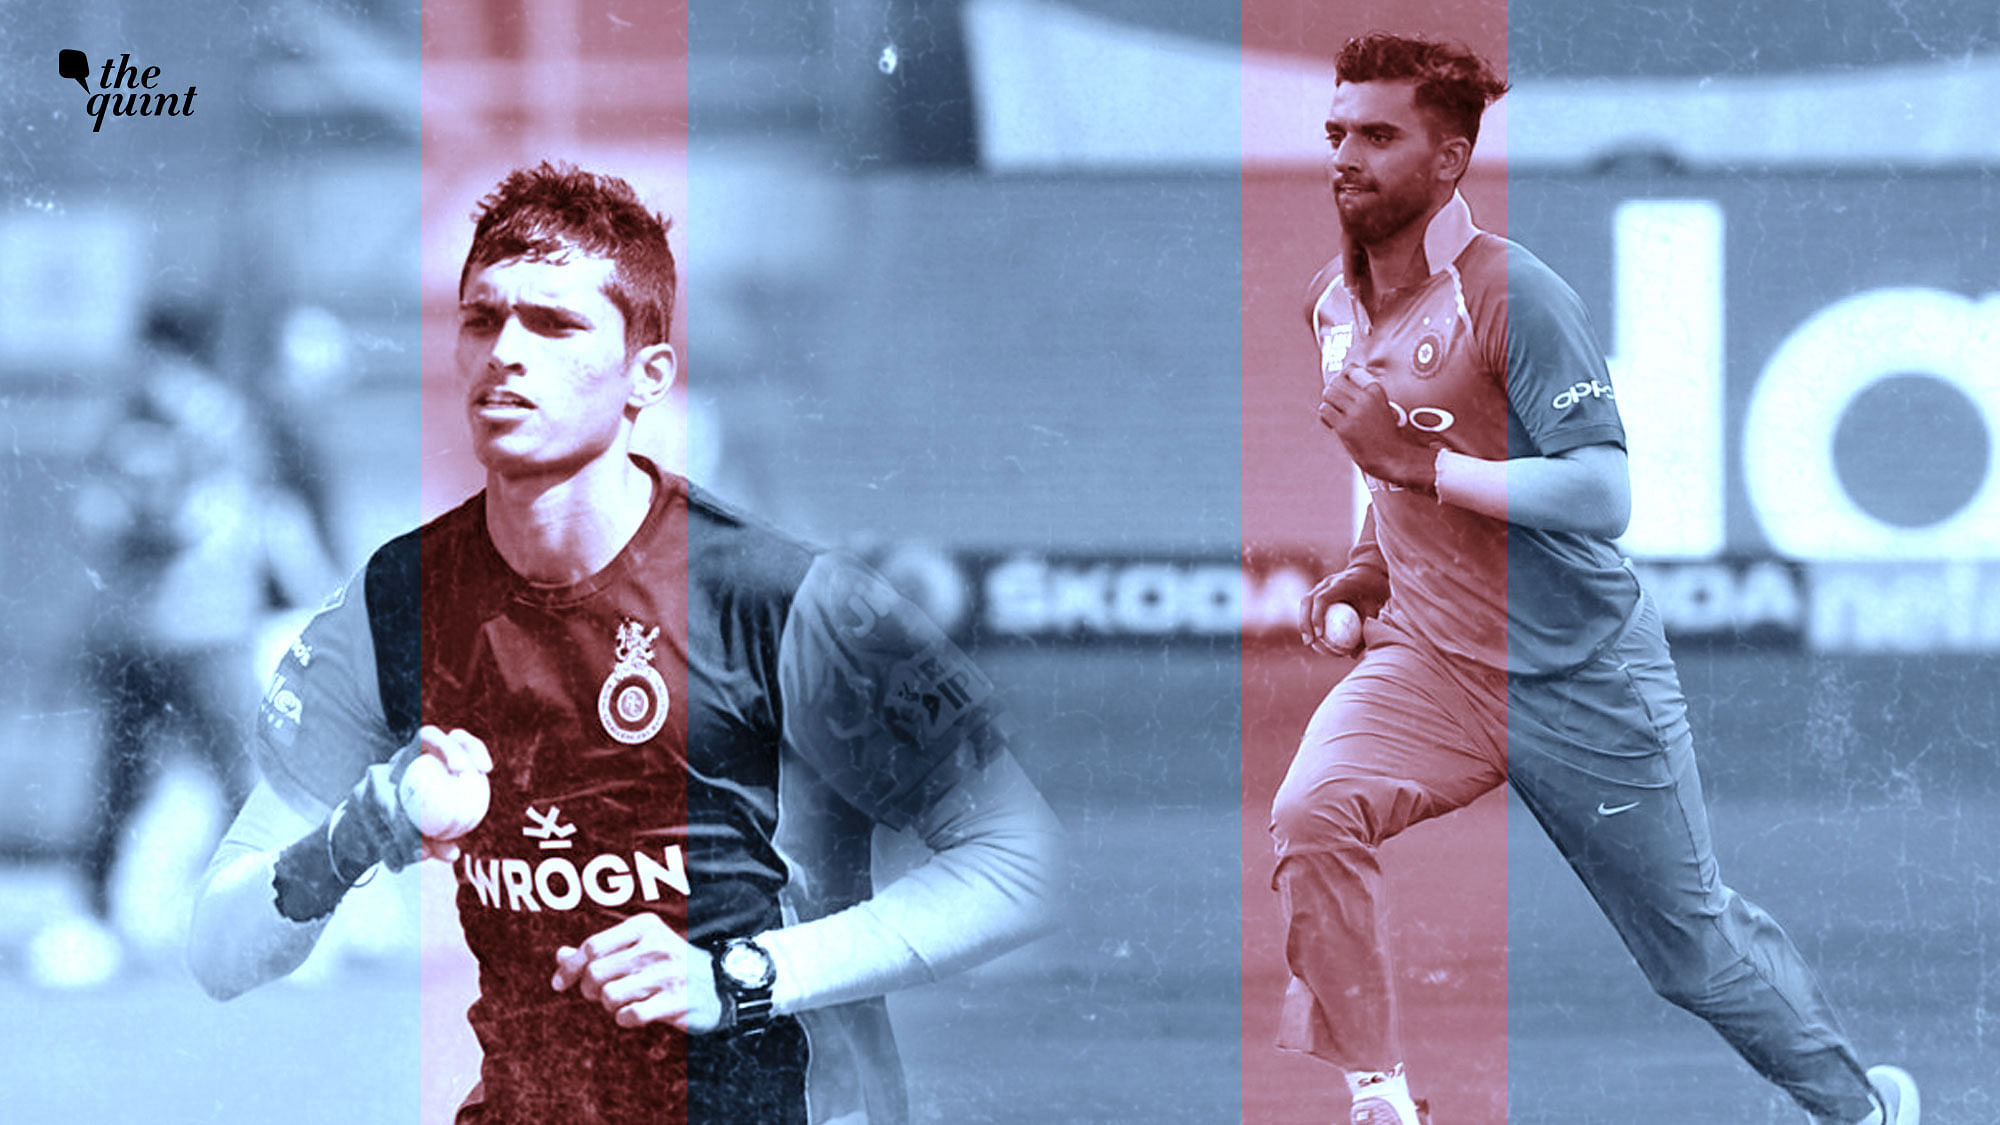 A look at the four Indian cricketers who will look to cement their place in the side